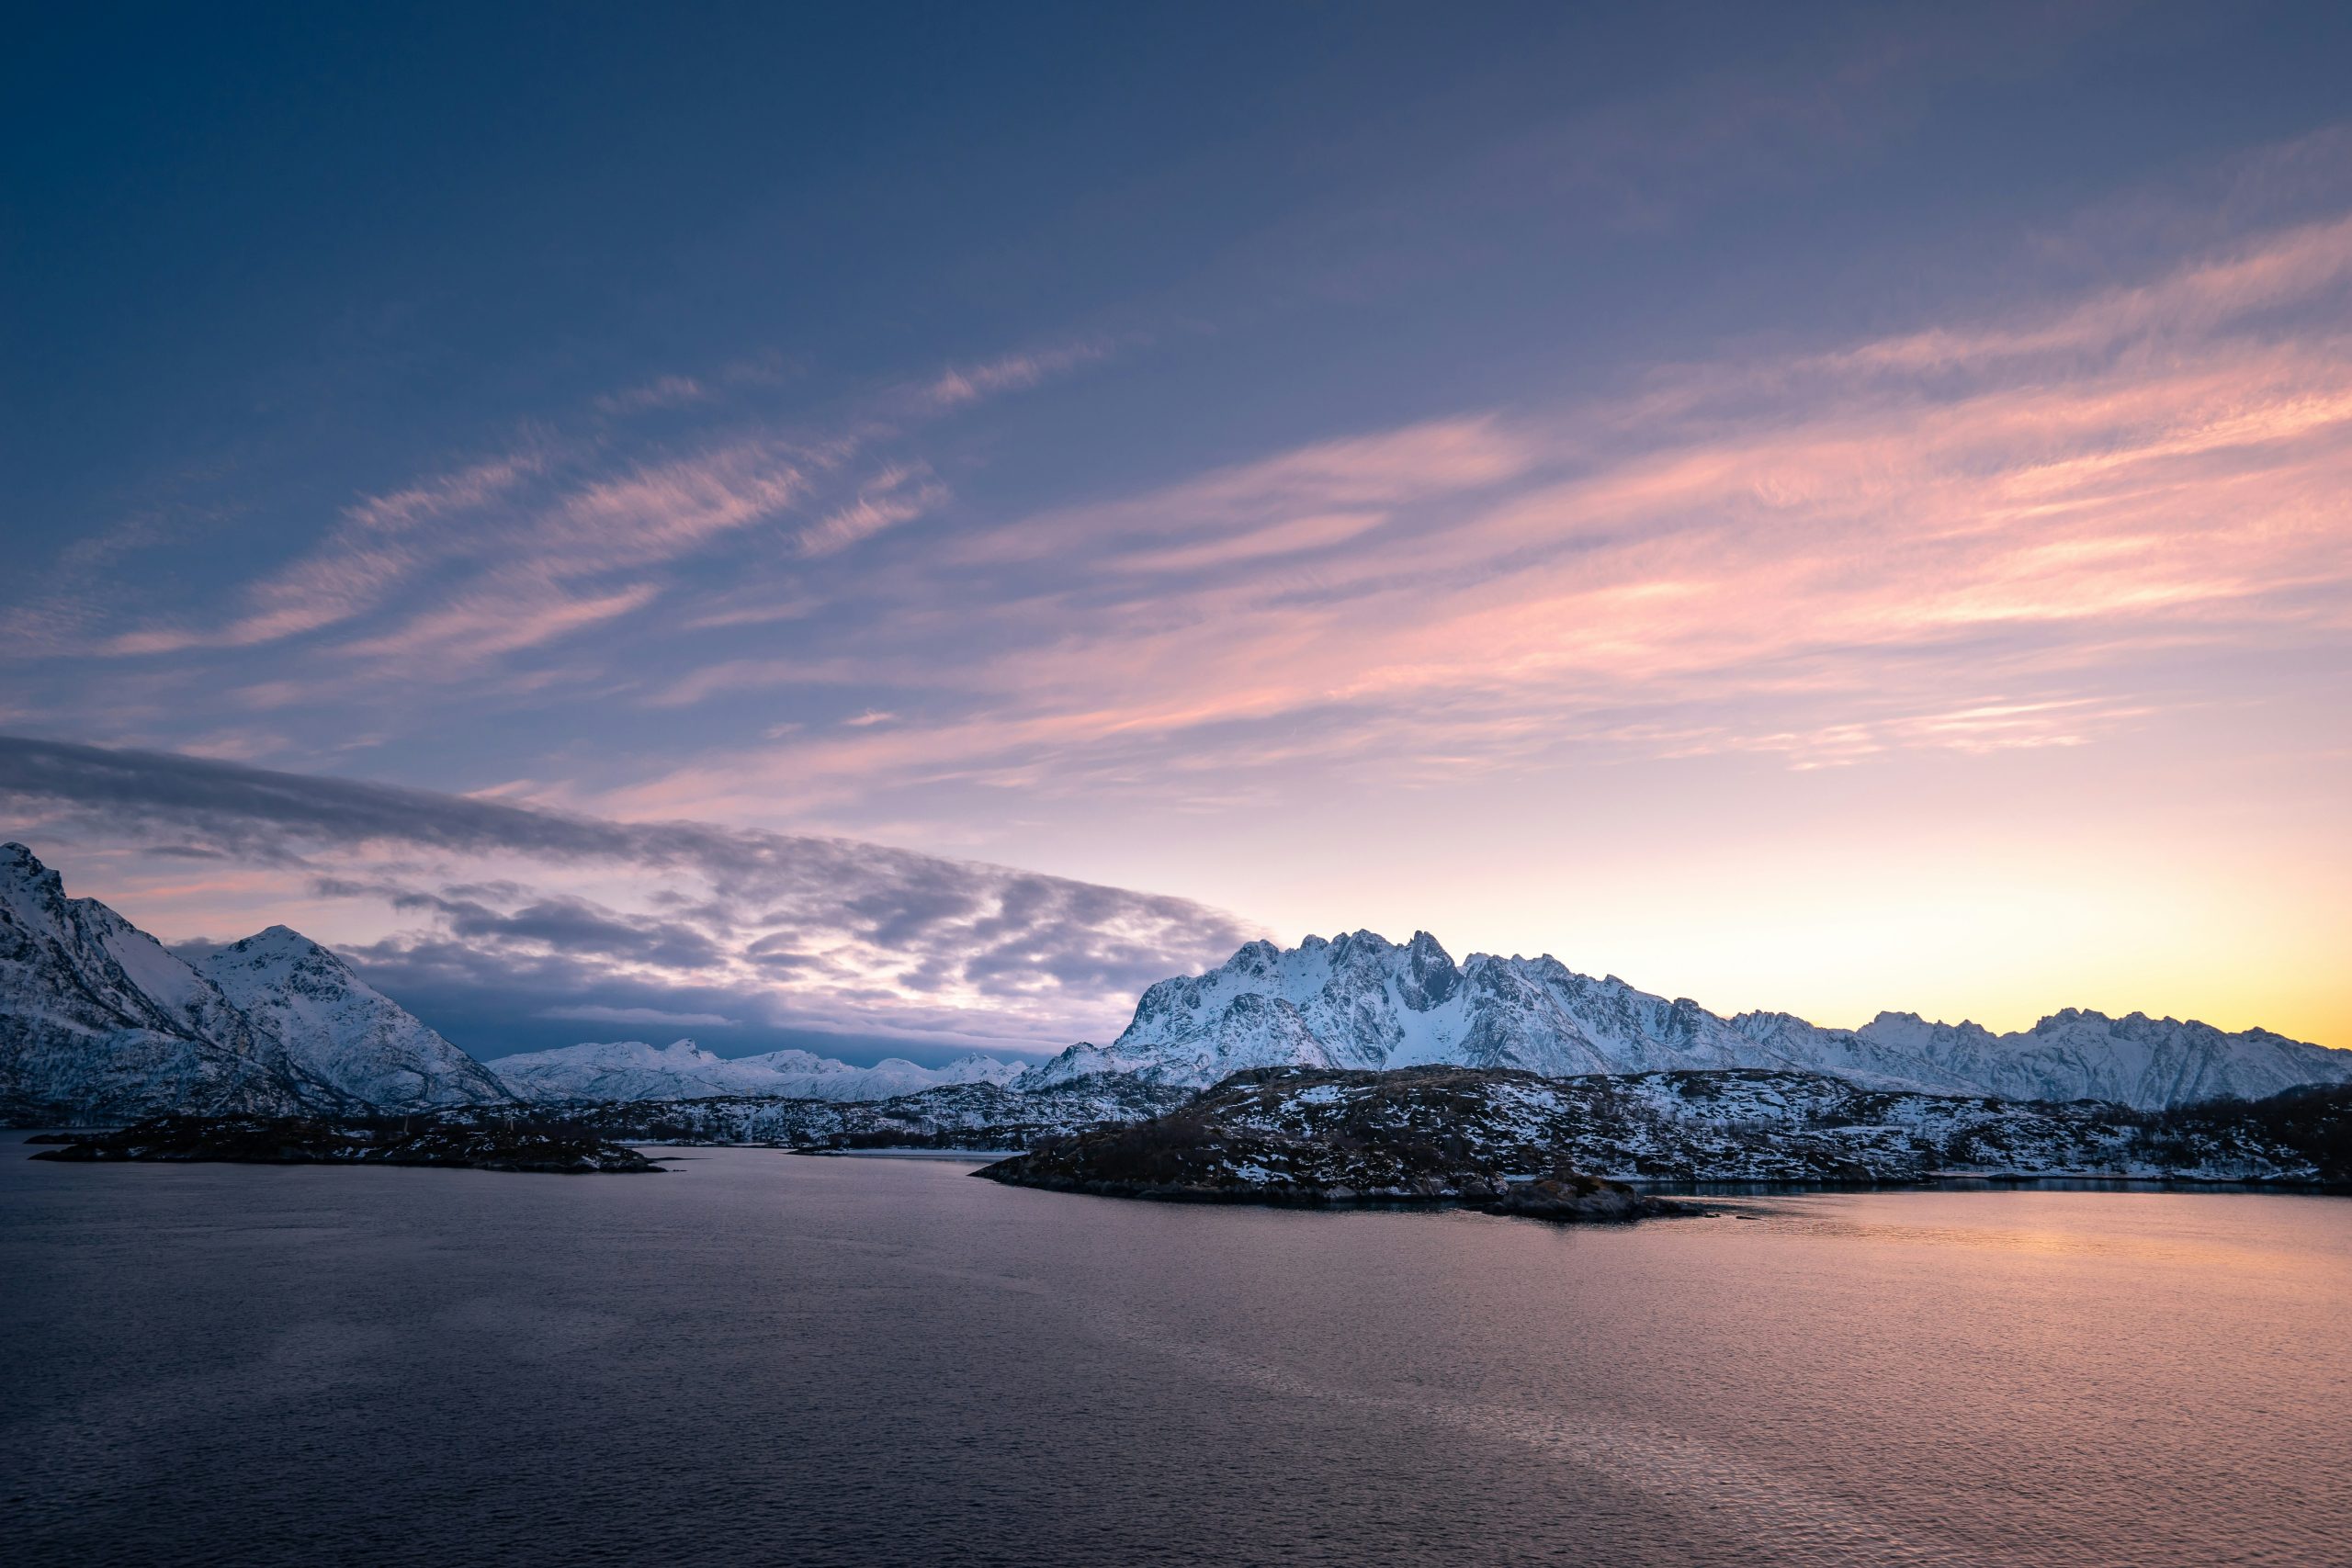 discover the stunning beauty of norway's fjords, with their majestic cliffs, crystal clear waters, and picturesque villages nestled in the valleys.